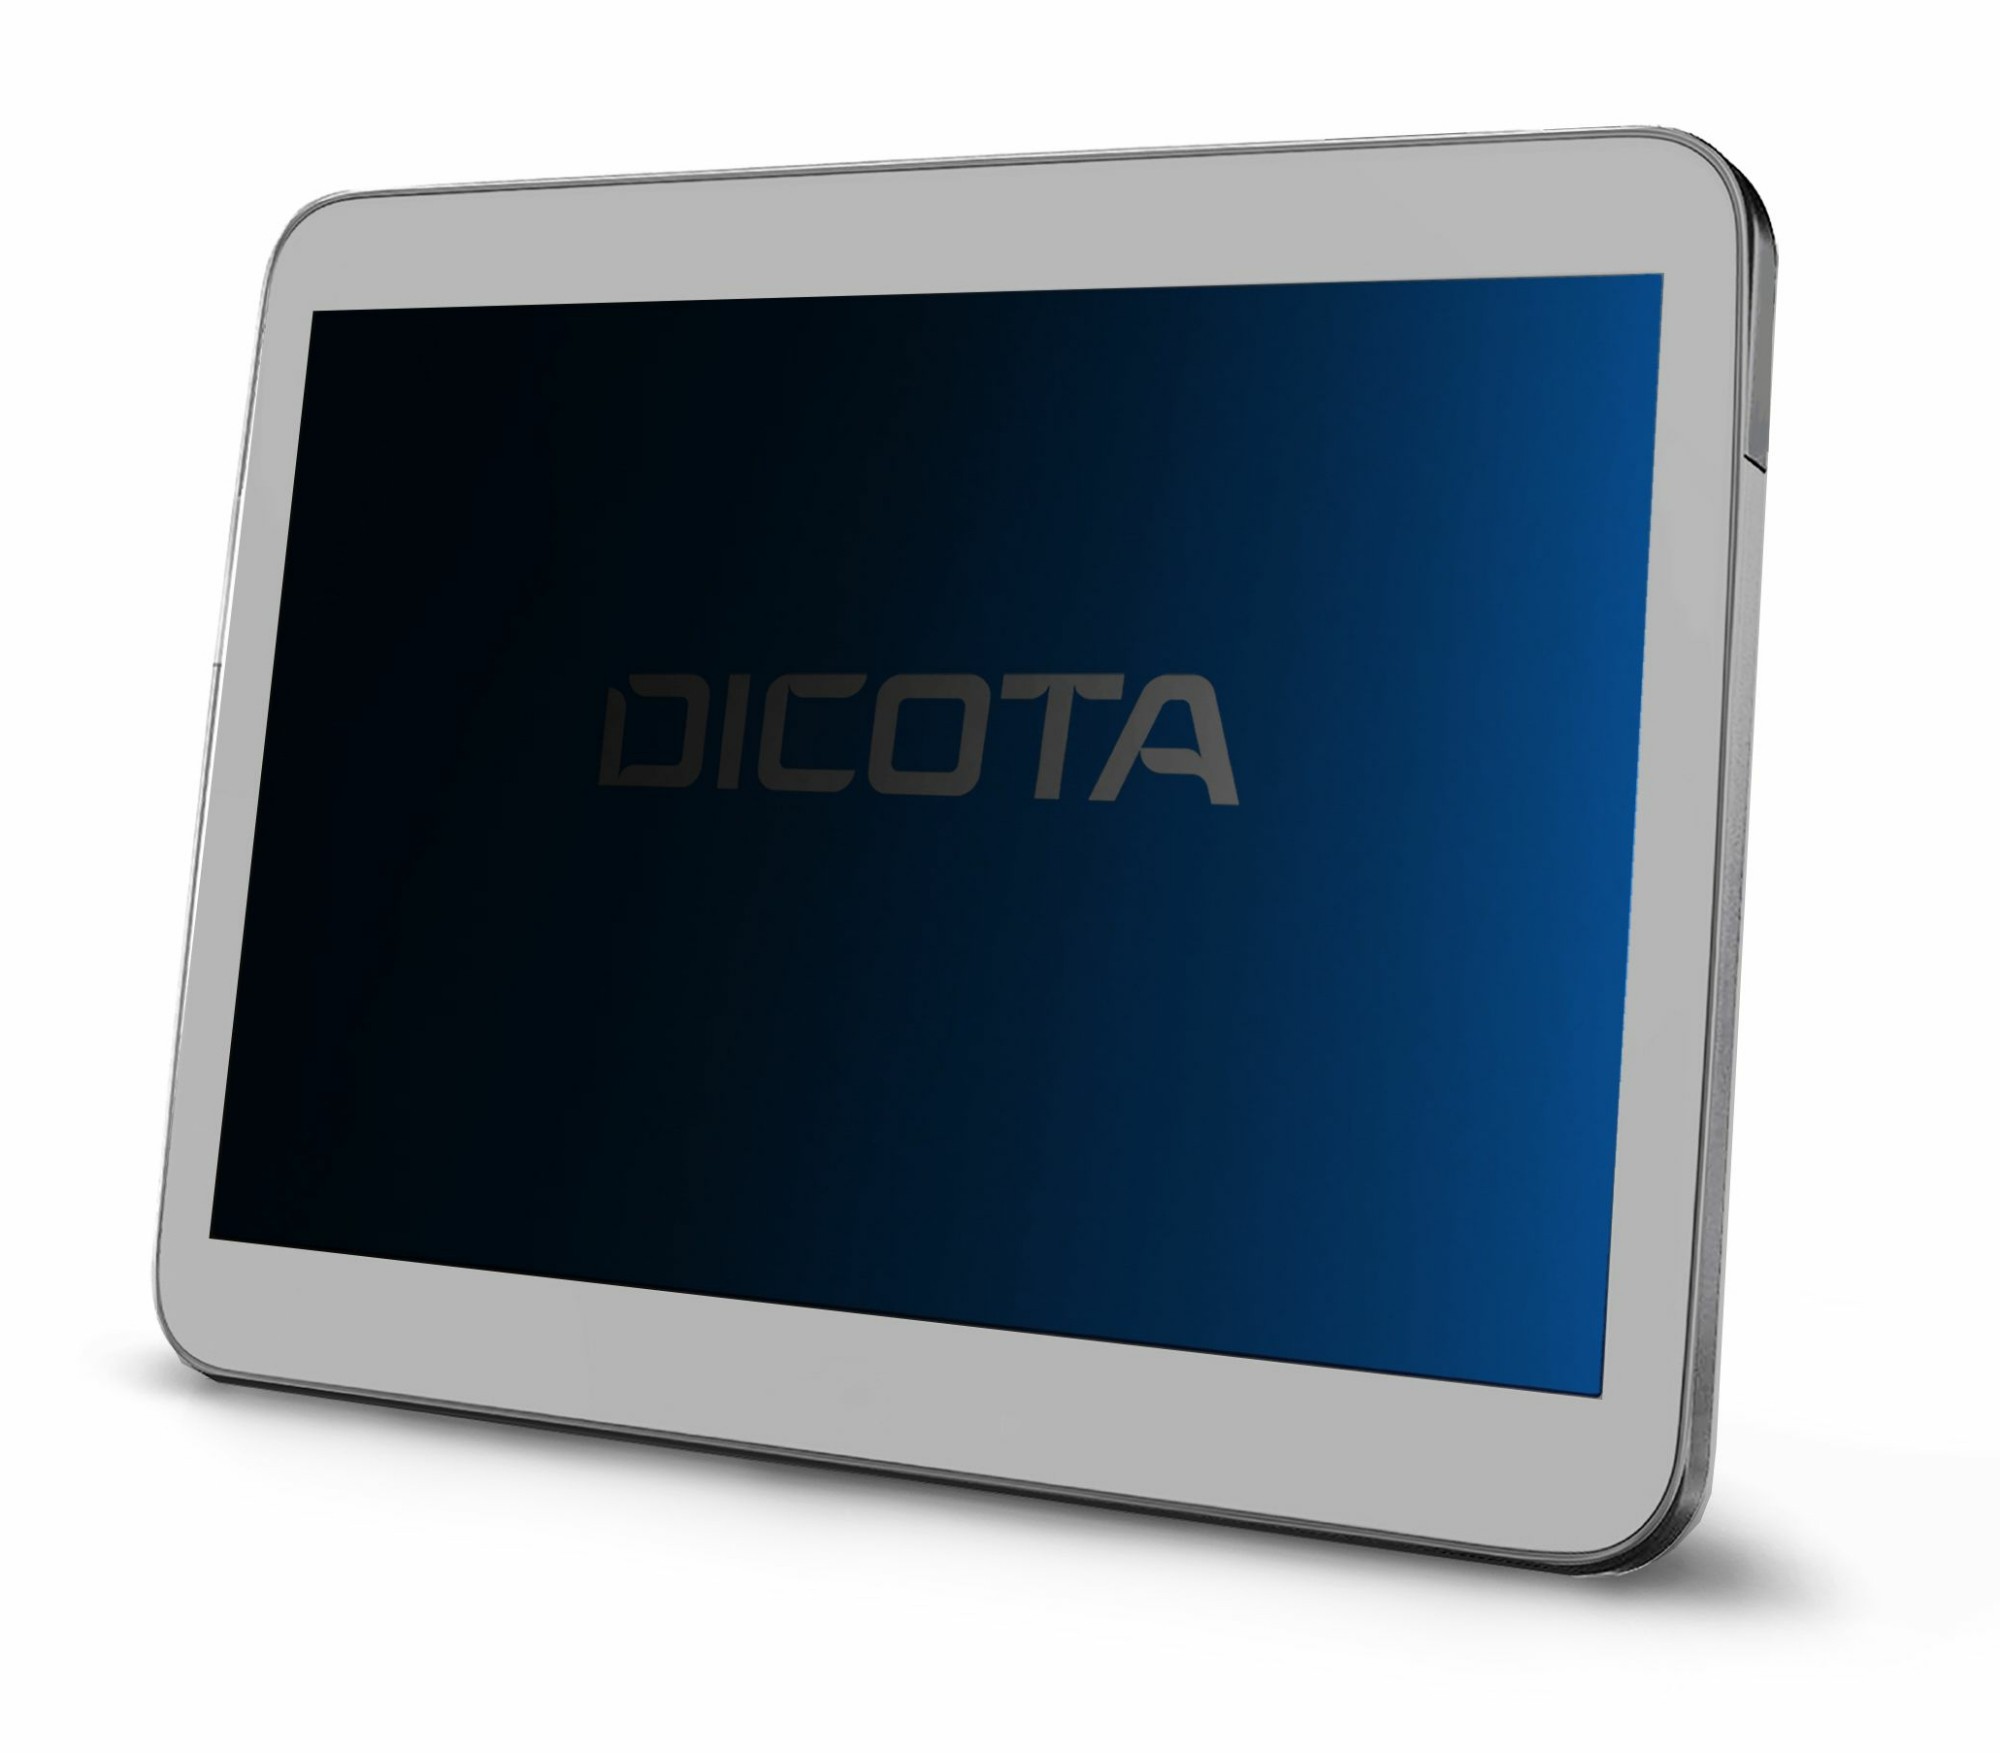 Photos - Other for Computer Dicota D70191 display privacy filters 25.9 cm  (10.2")